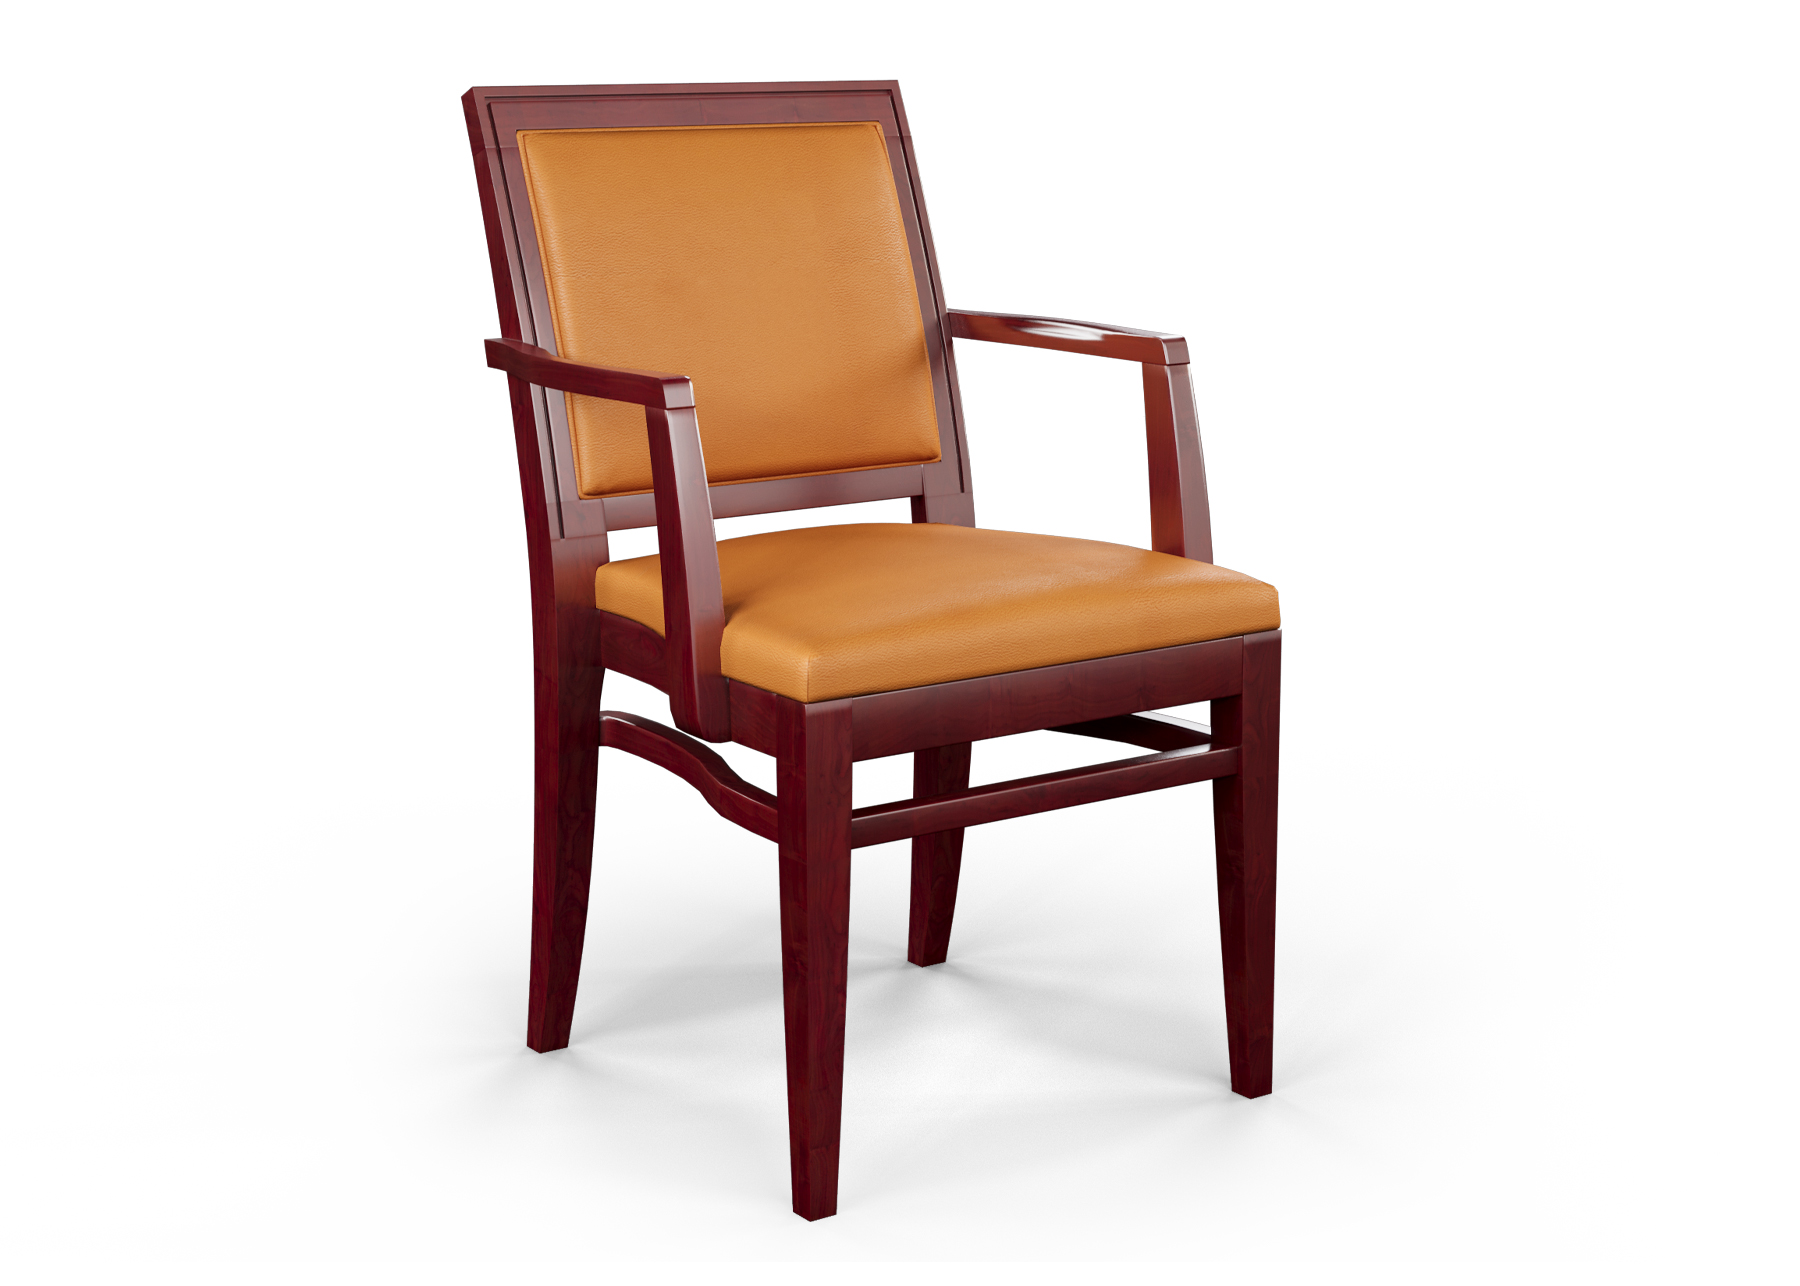  VOYAGE STACKING ARM CHAIR